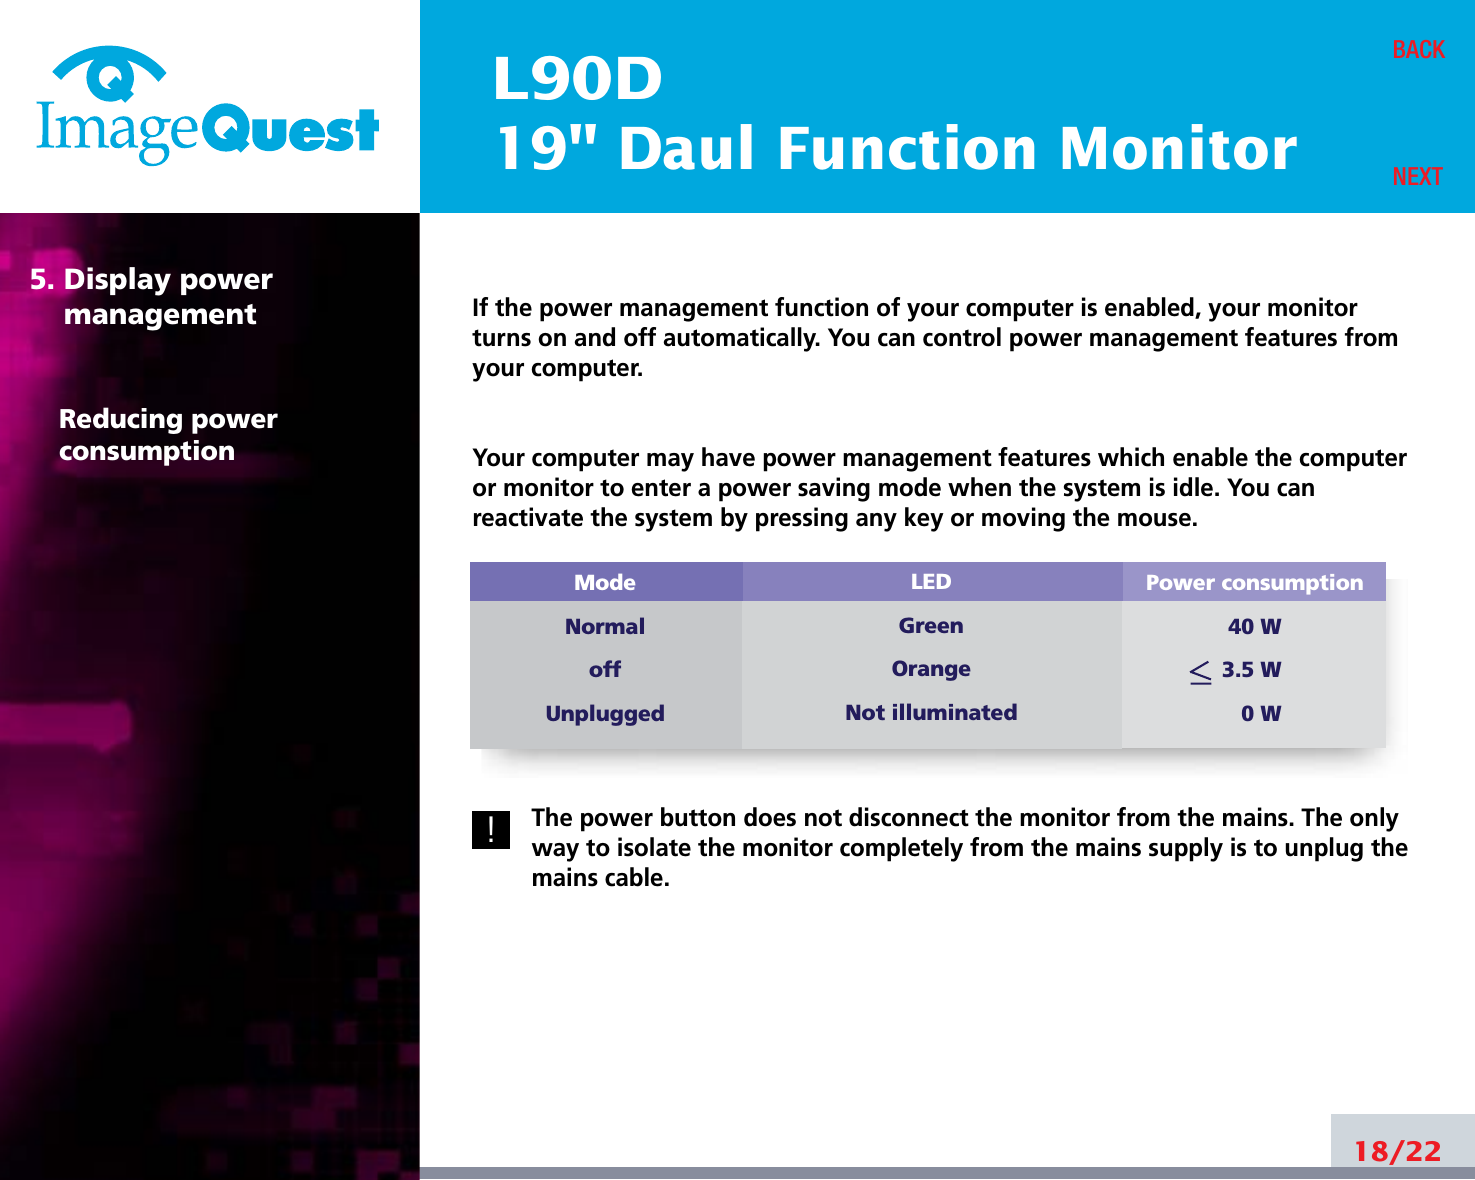 L90D19&quot; Daul Function MonitorIf the power management function of your computer is enabled, your monitorturns on and off automatically. You can control power management features fromyour computer.Your computer may have power management features which enable the computeror monitor to enter a power saving mode when the system is idle. You canreactivate the system by pressing any key or moving the mouse.The power button does not disconnect the monitor from the mains. The onlyway to isolate the monitor completely from the mains supply is to unplug themains cable.18/22BACKNEXT5. Display power managementReducing powerconsumptionPower consumption40 W3.5 W0 WModeNormaloffUnpluggedLEDGreenOrangeNot illuminated!